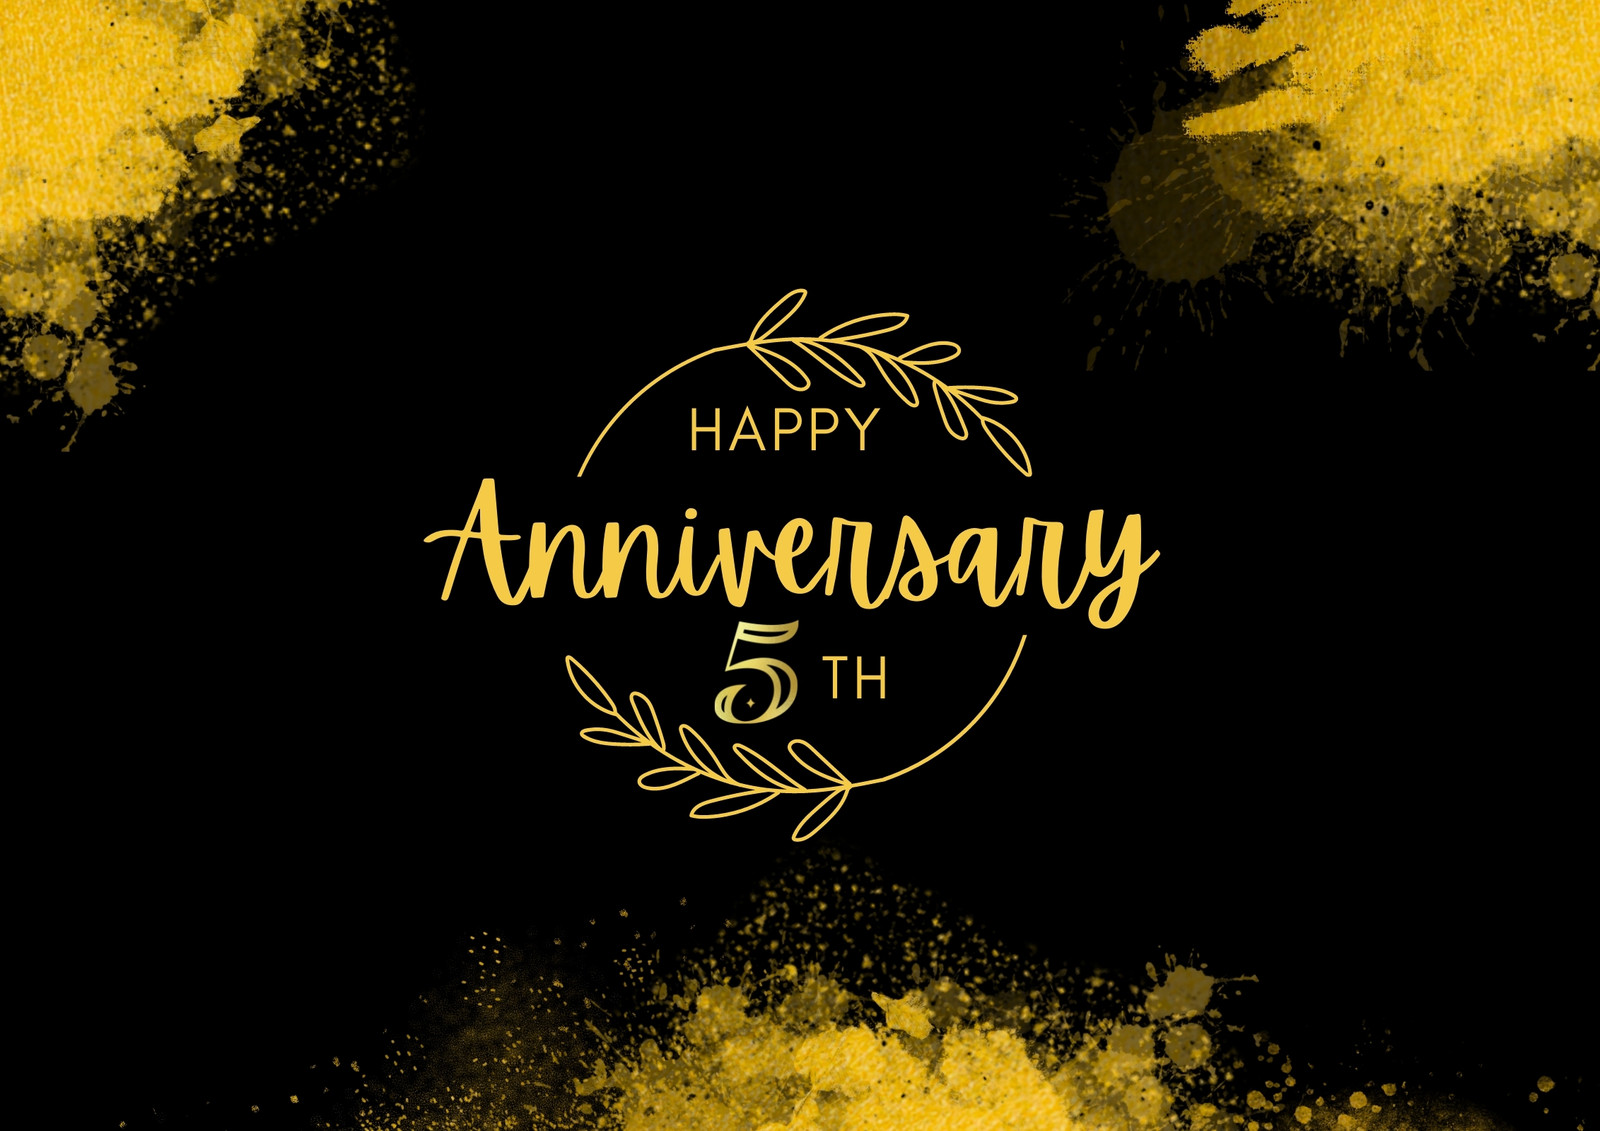 Page 4 - Free and customizable anniversary templates